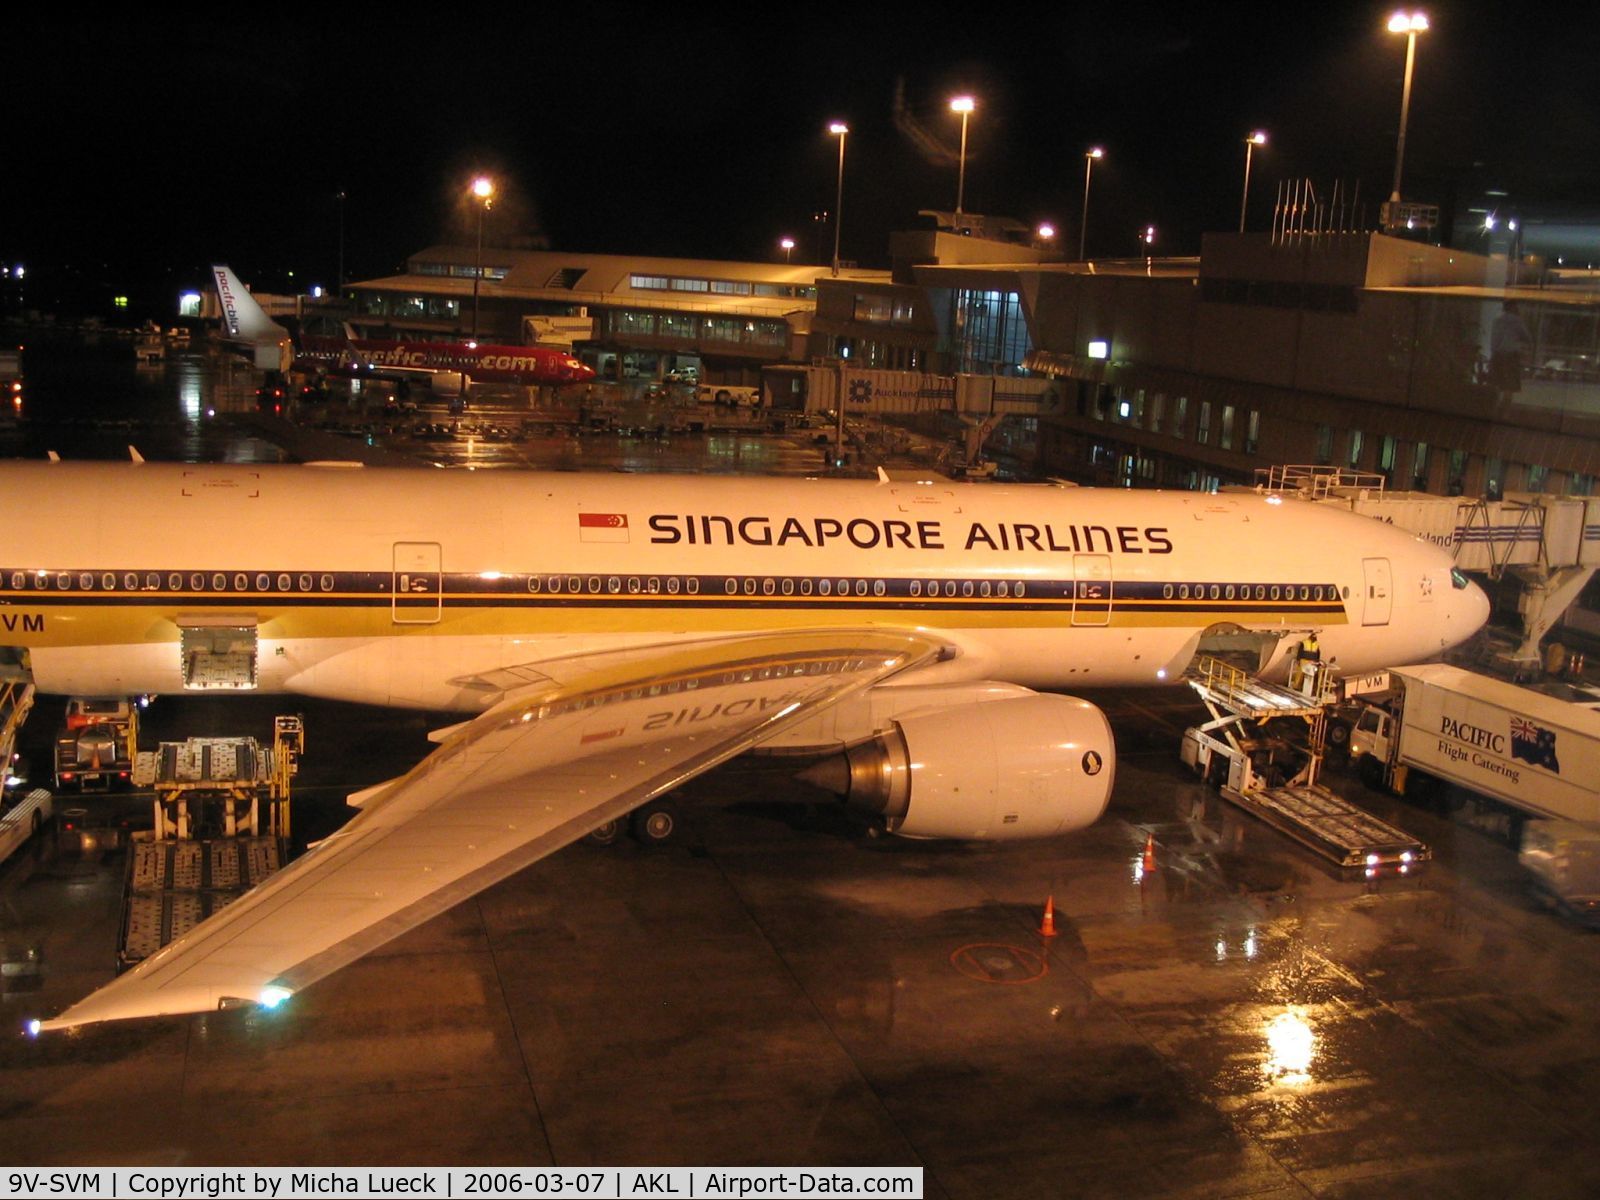 9V-SVM, 2003 Boeing 777-212/ER C/N 30874, B777-200ER getting ready for the late night departure for Singapore